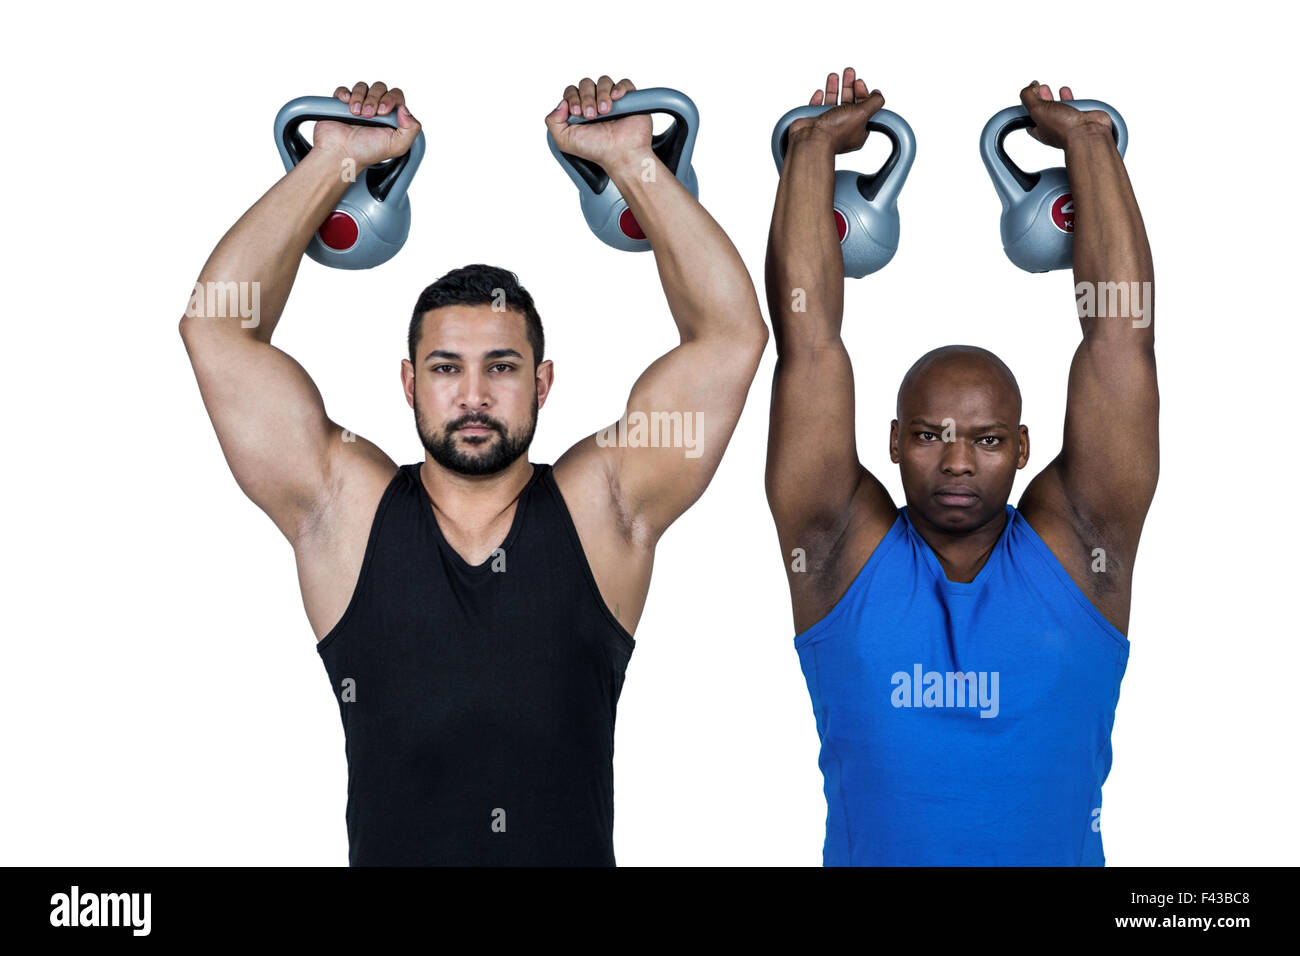 Strong friends lifting kettlebells together Stock Photo